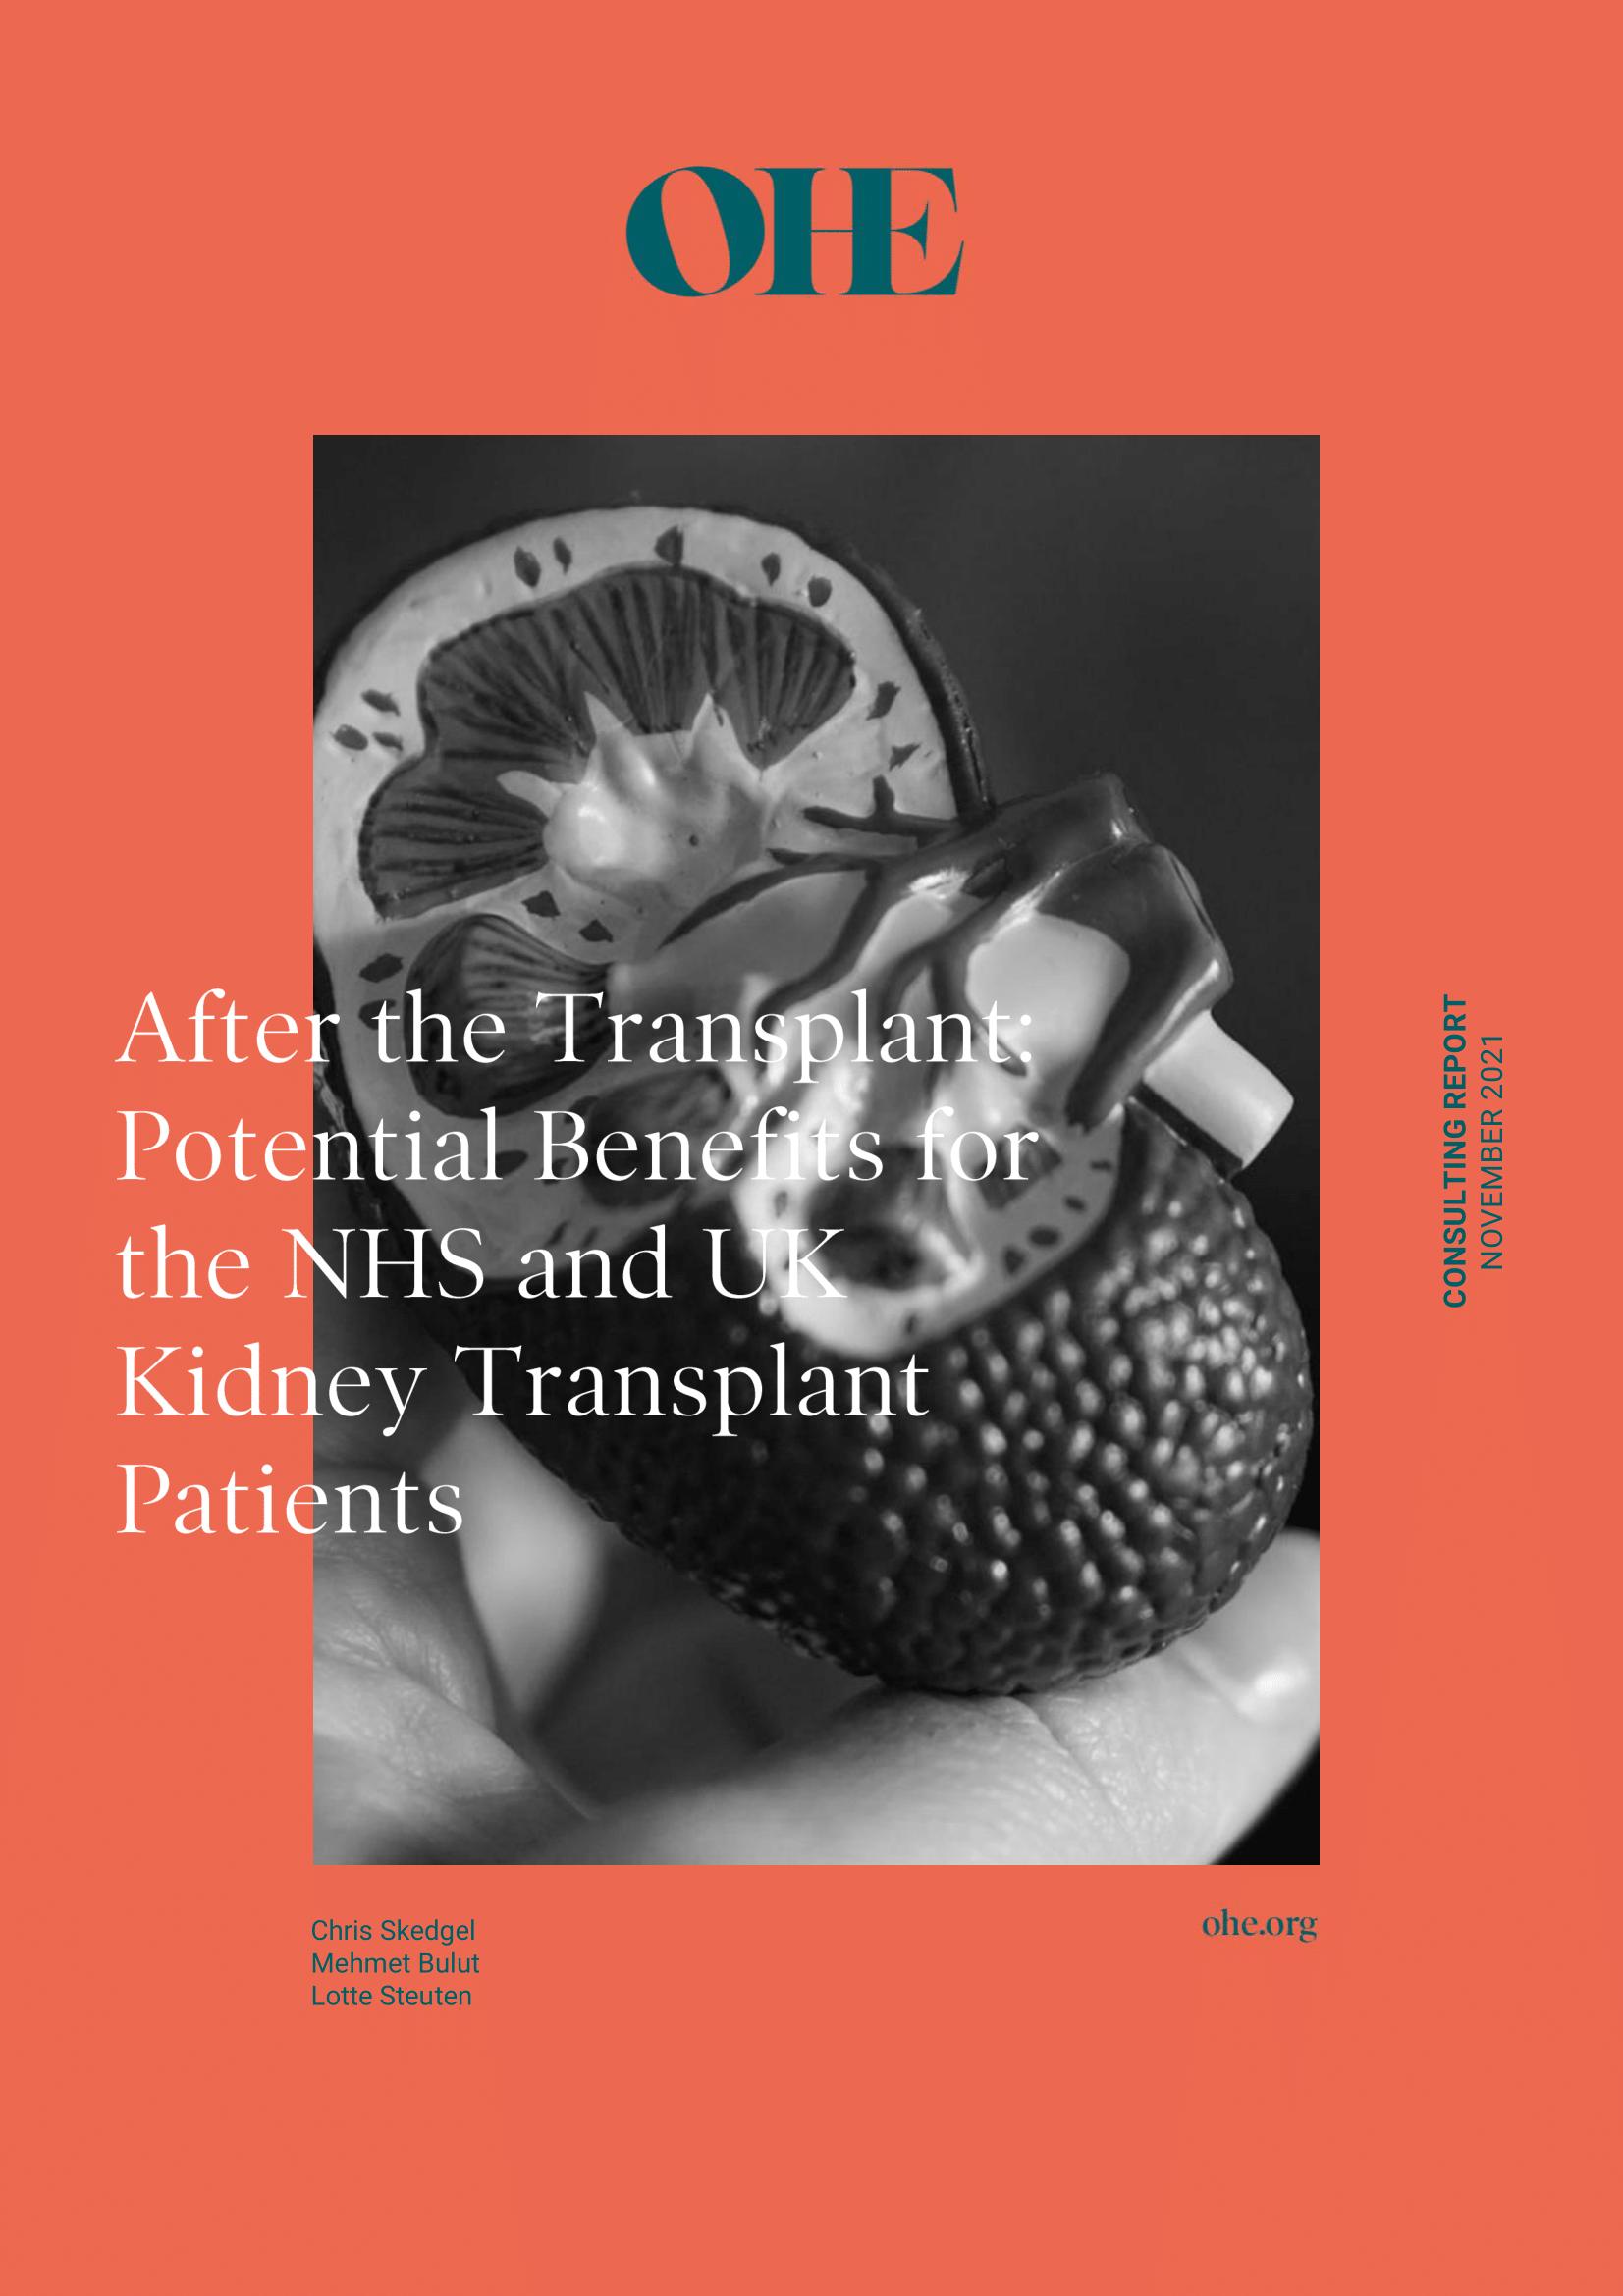 After the Transplant: Potential Benefits for the NHS and UK Kidney Transplant Patients